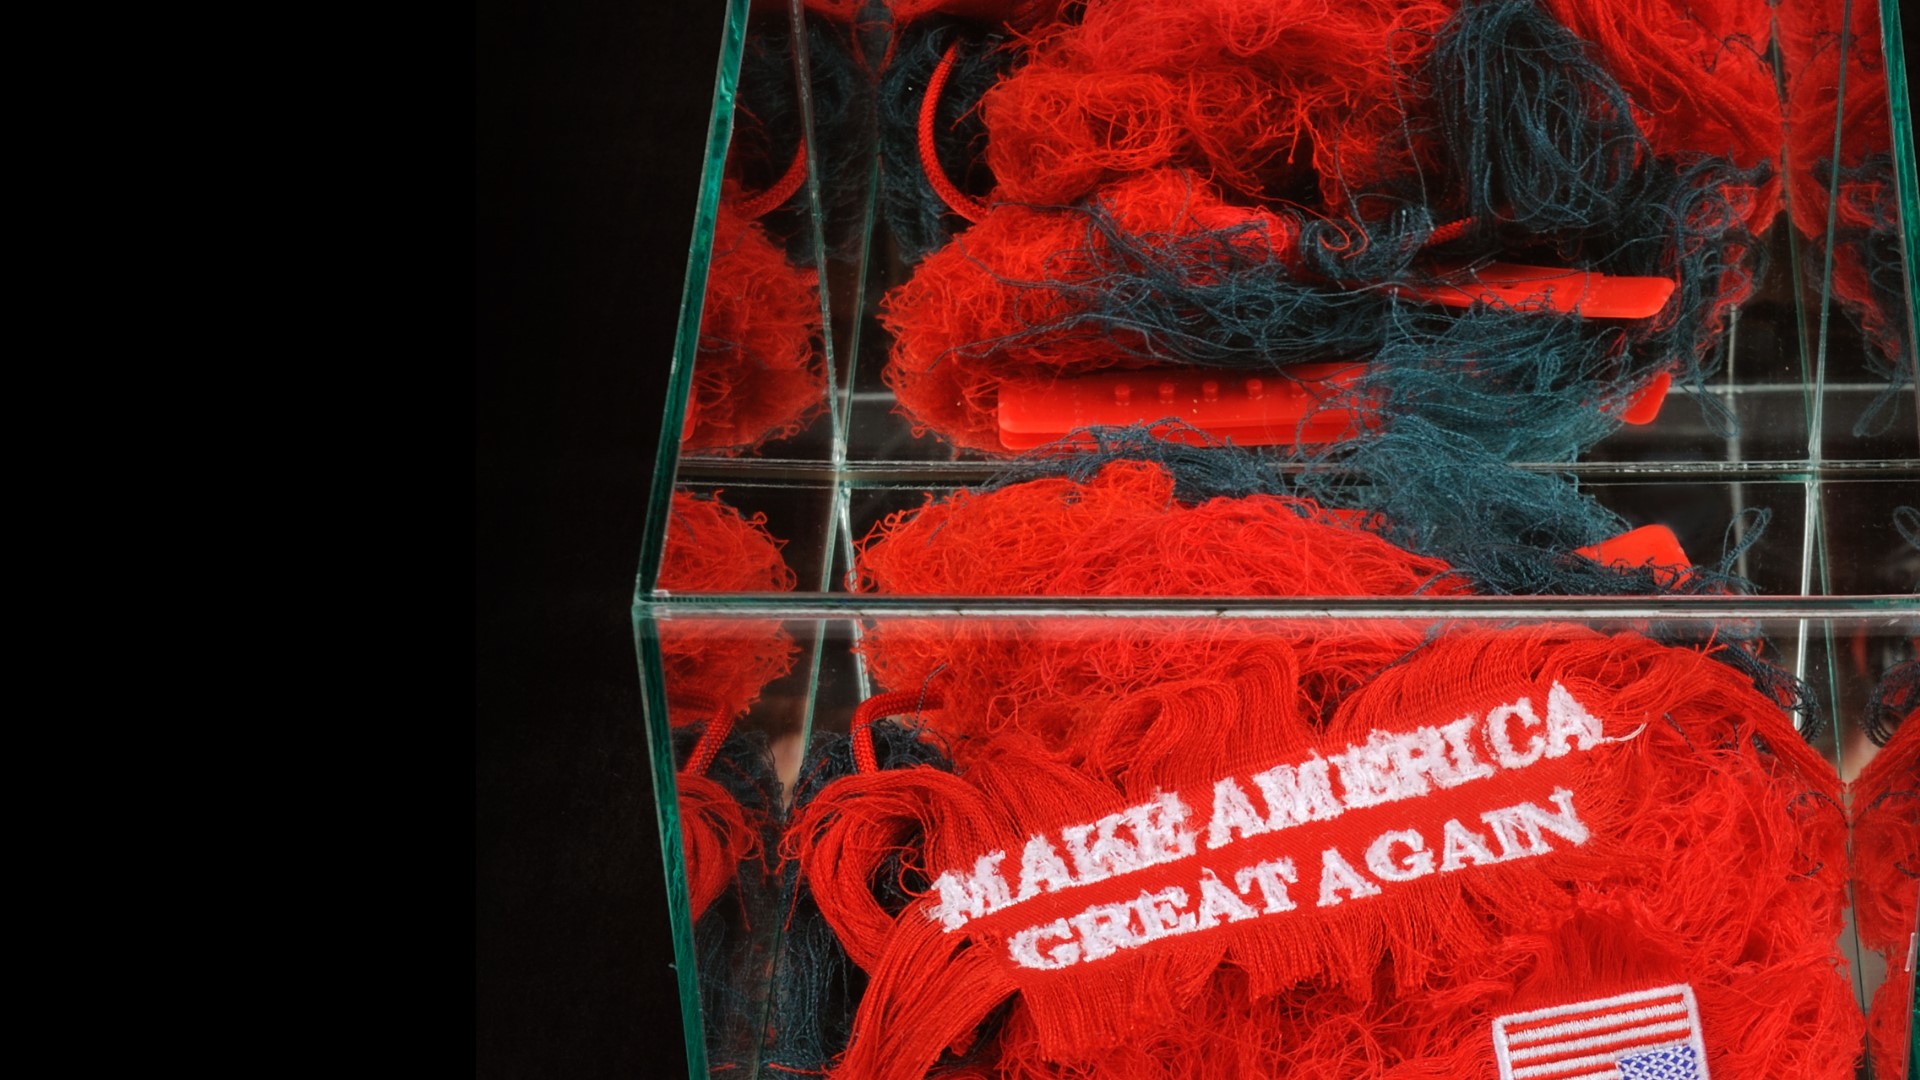 Artist Kate Kretz comments on hate speech by reconstructing MAGA hats into identifiable symbols of hate